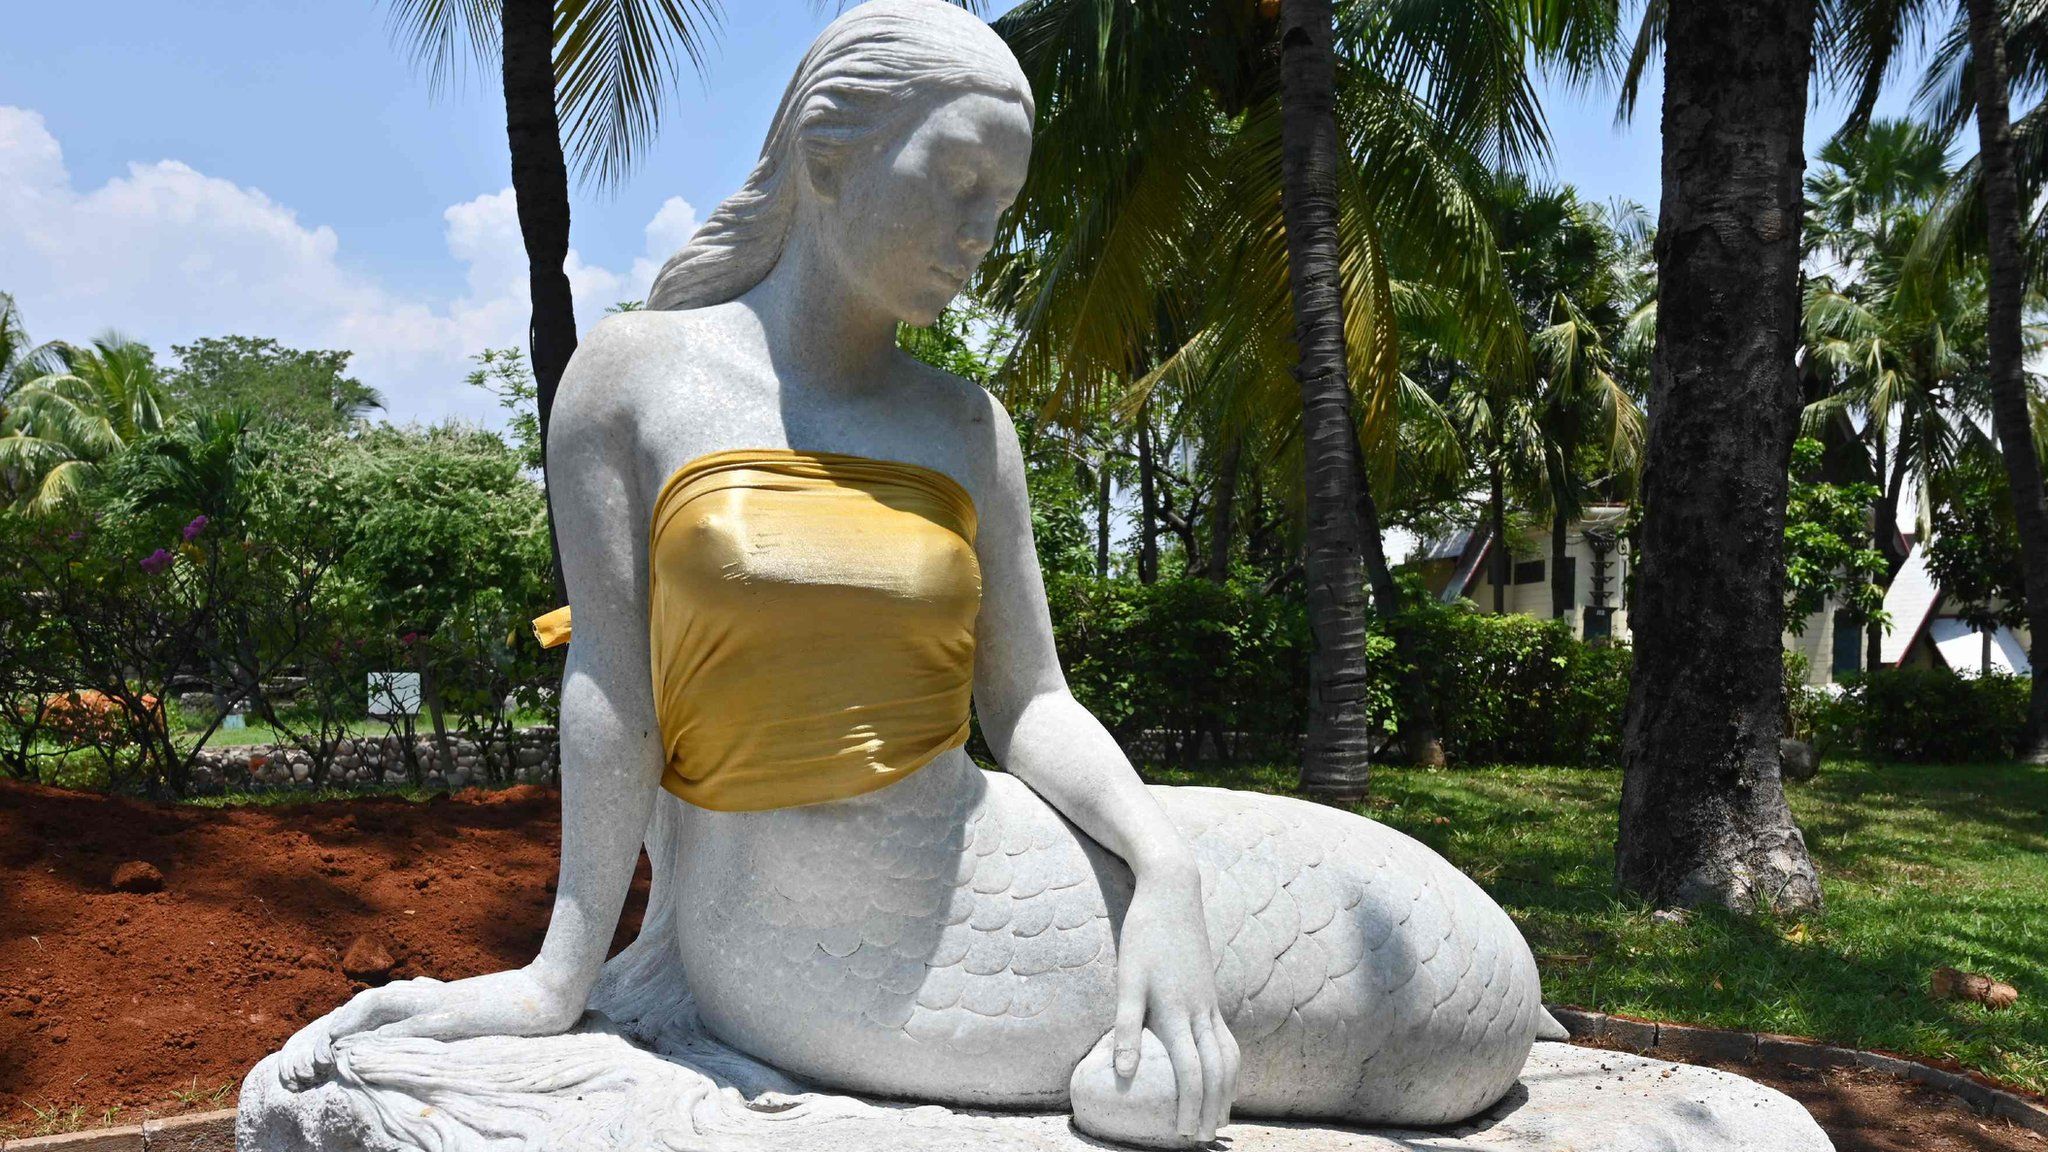 Mermaid statue covered up at Ancol Dreamland theme park in Indonesia's capital, Jakarta